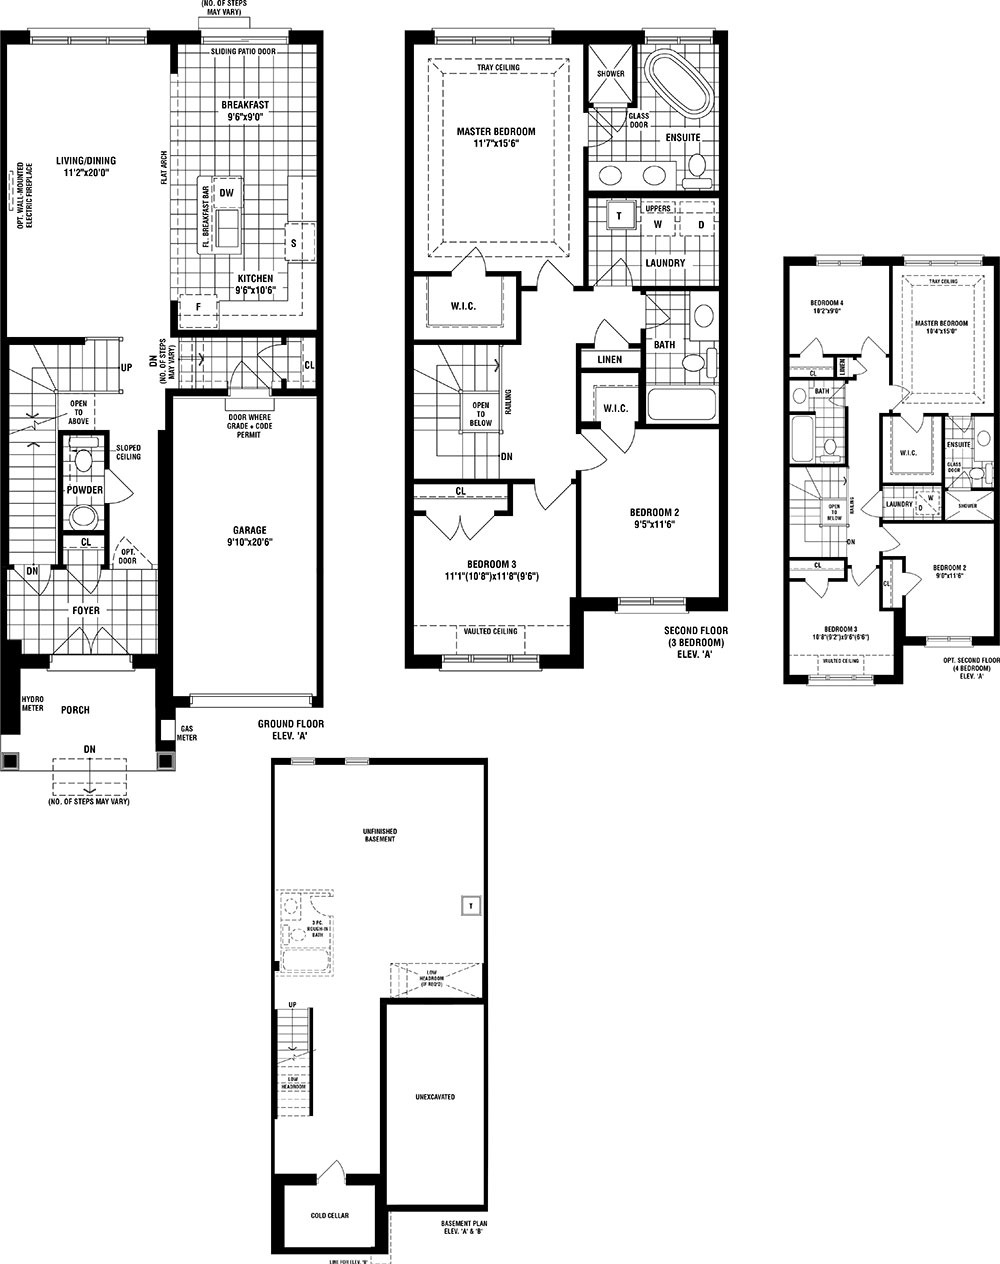 BLK 93 TH 2 Floor Plan of Whitby Meadows Fieldgate Homes with undefined beds